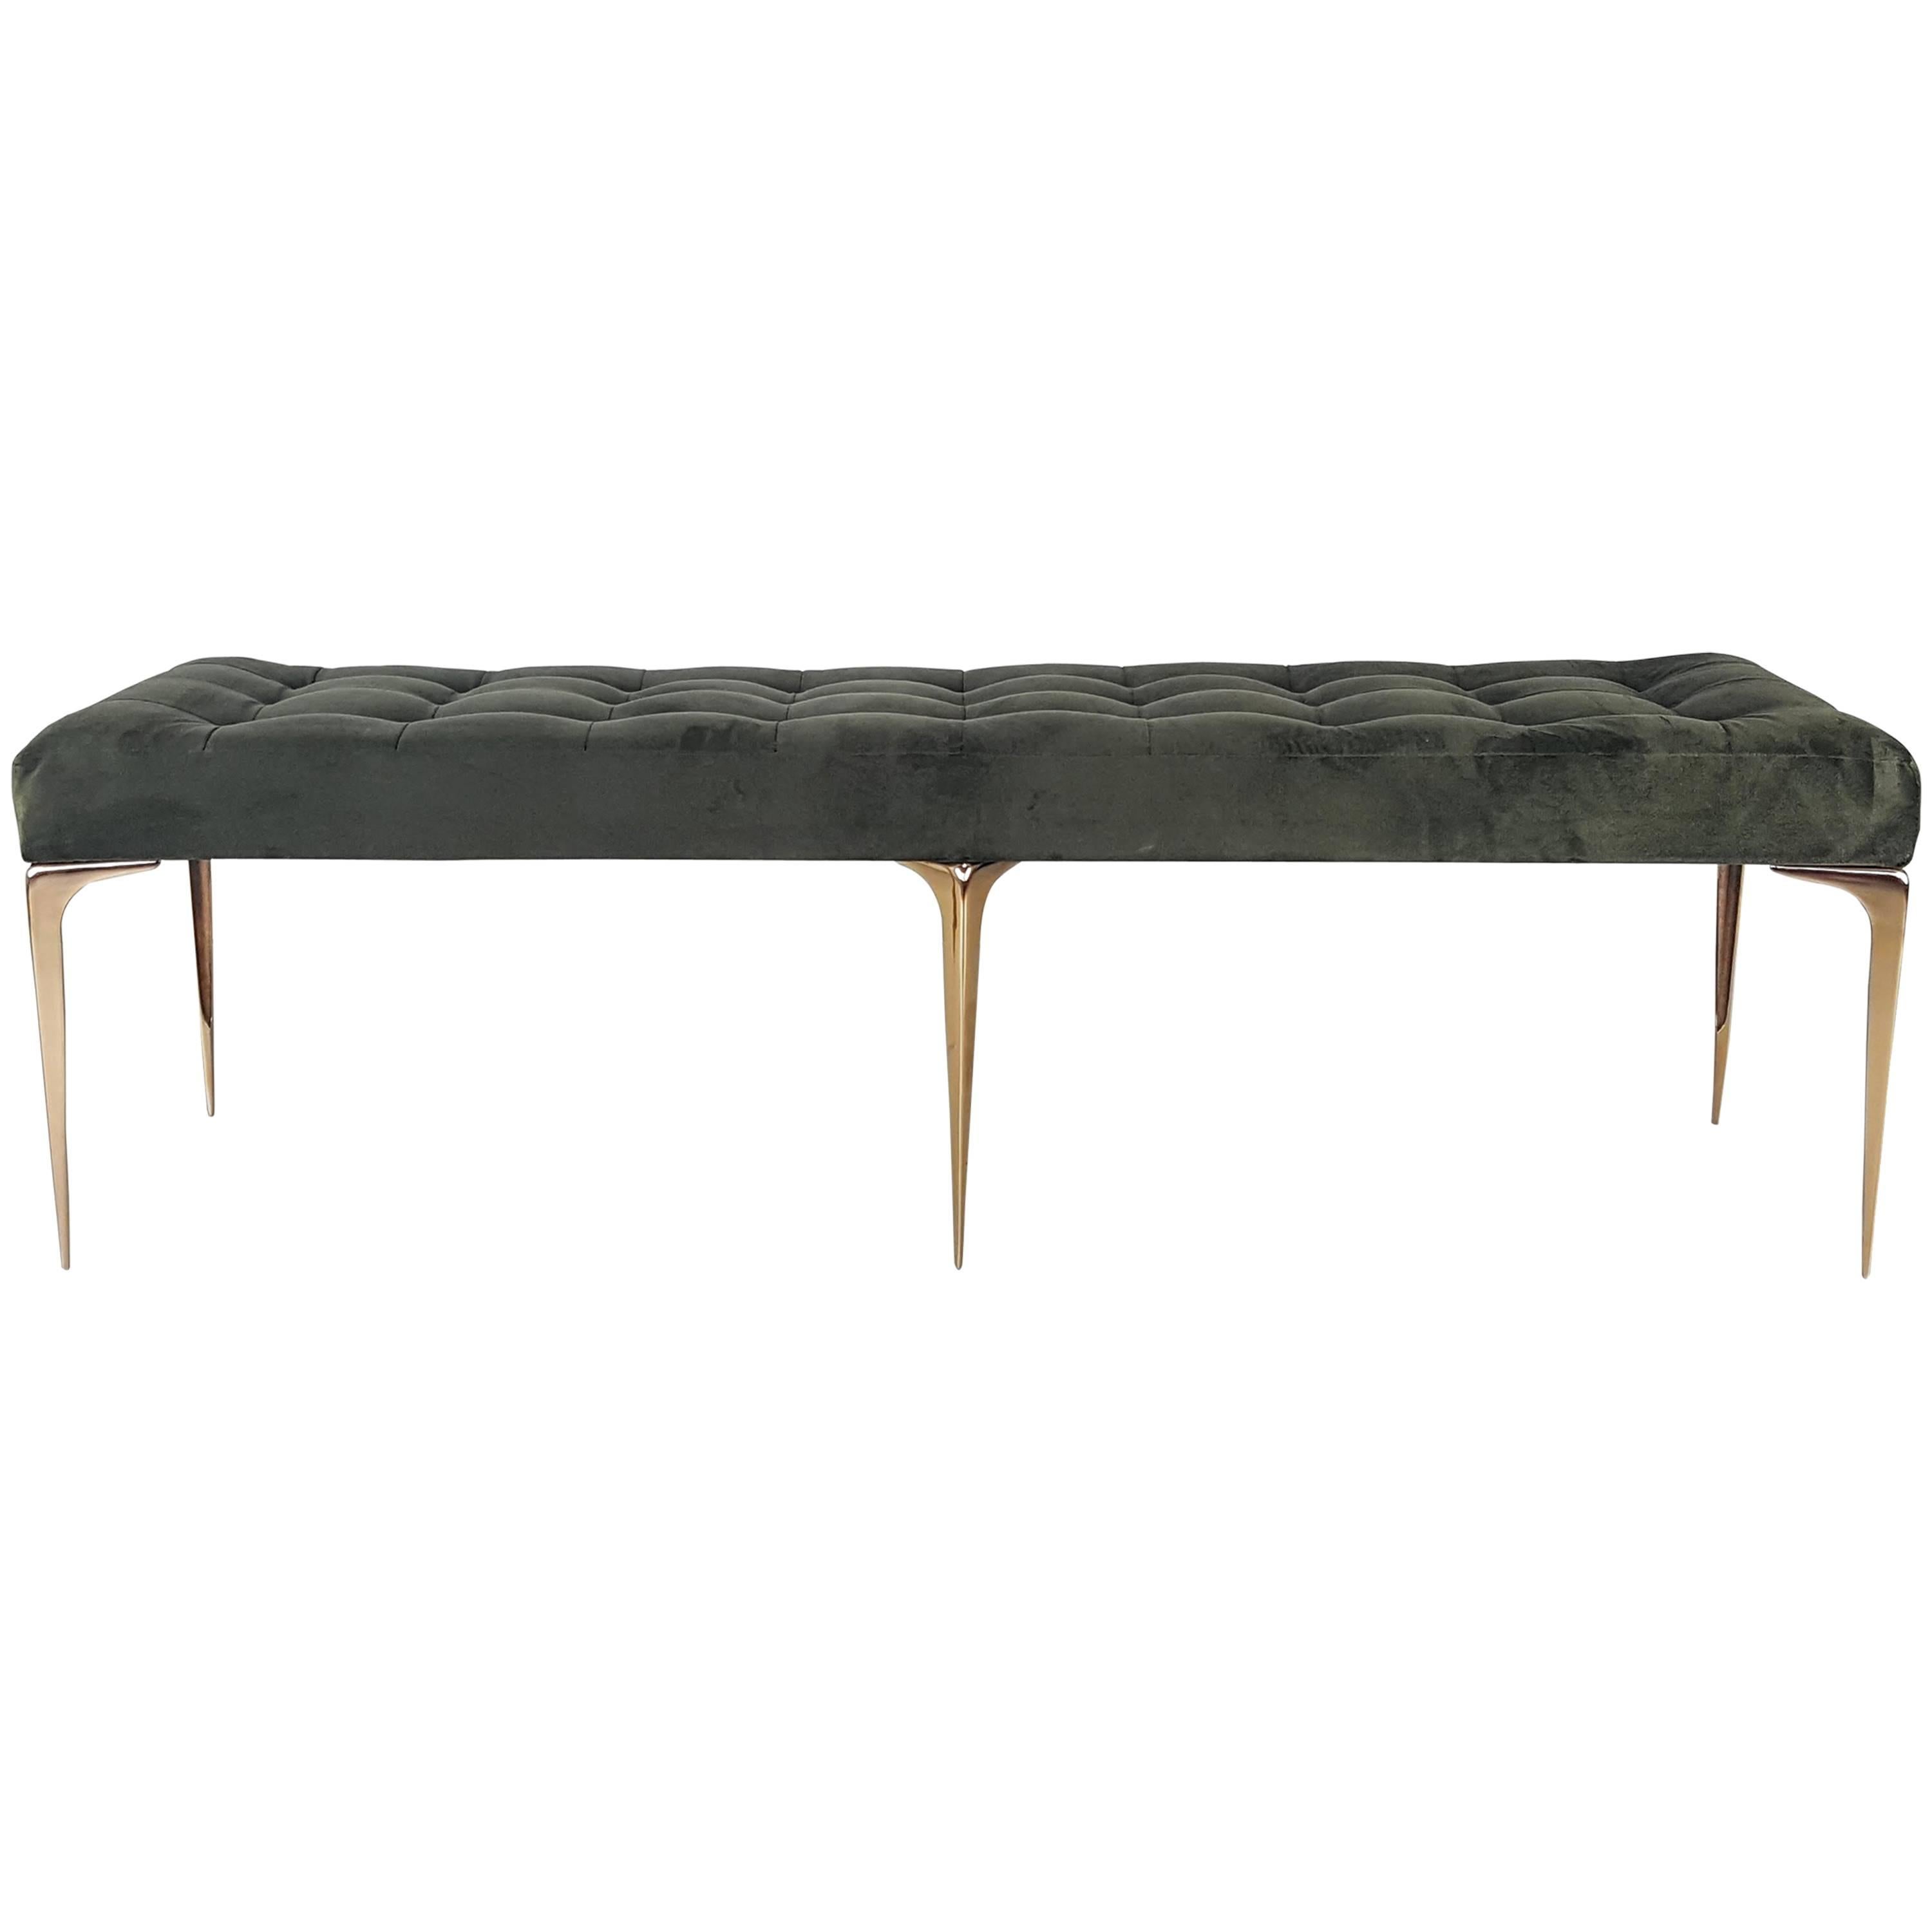 Mid-Century Italian Style Bench with Solid Bronze Tapered Legs in Gray Velvet